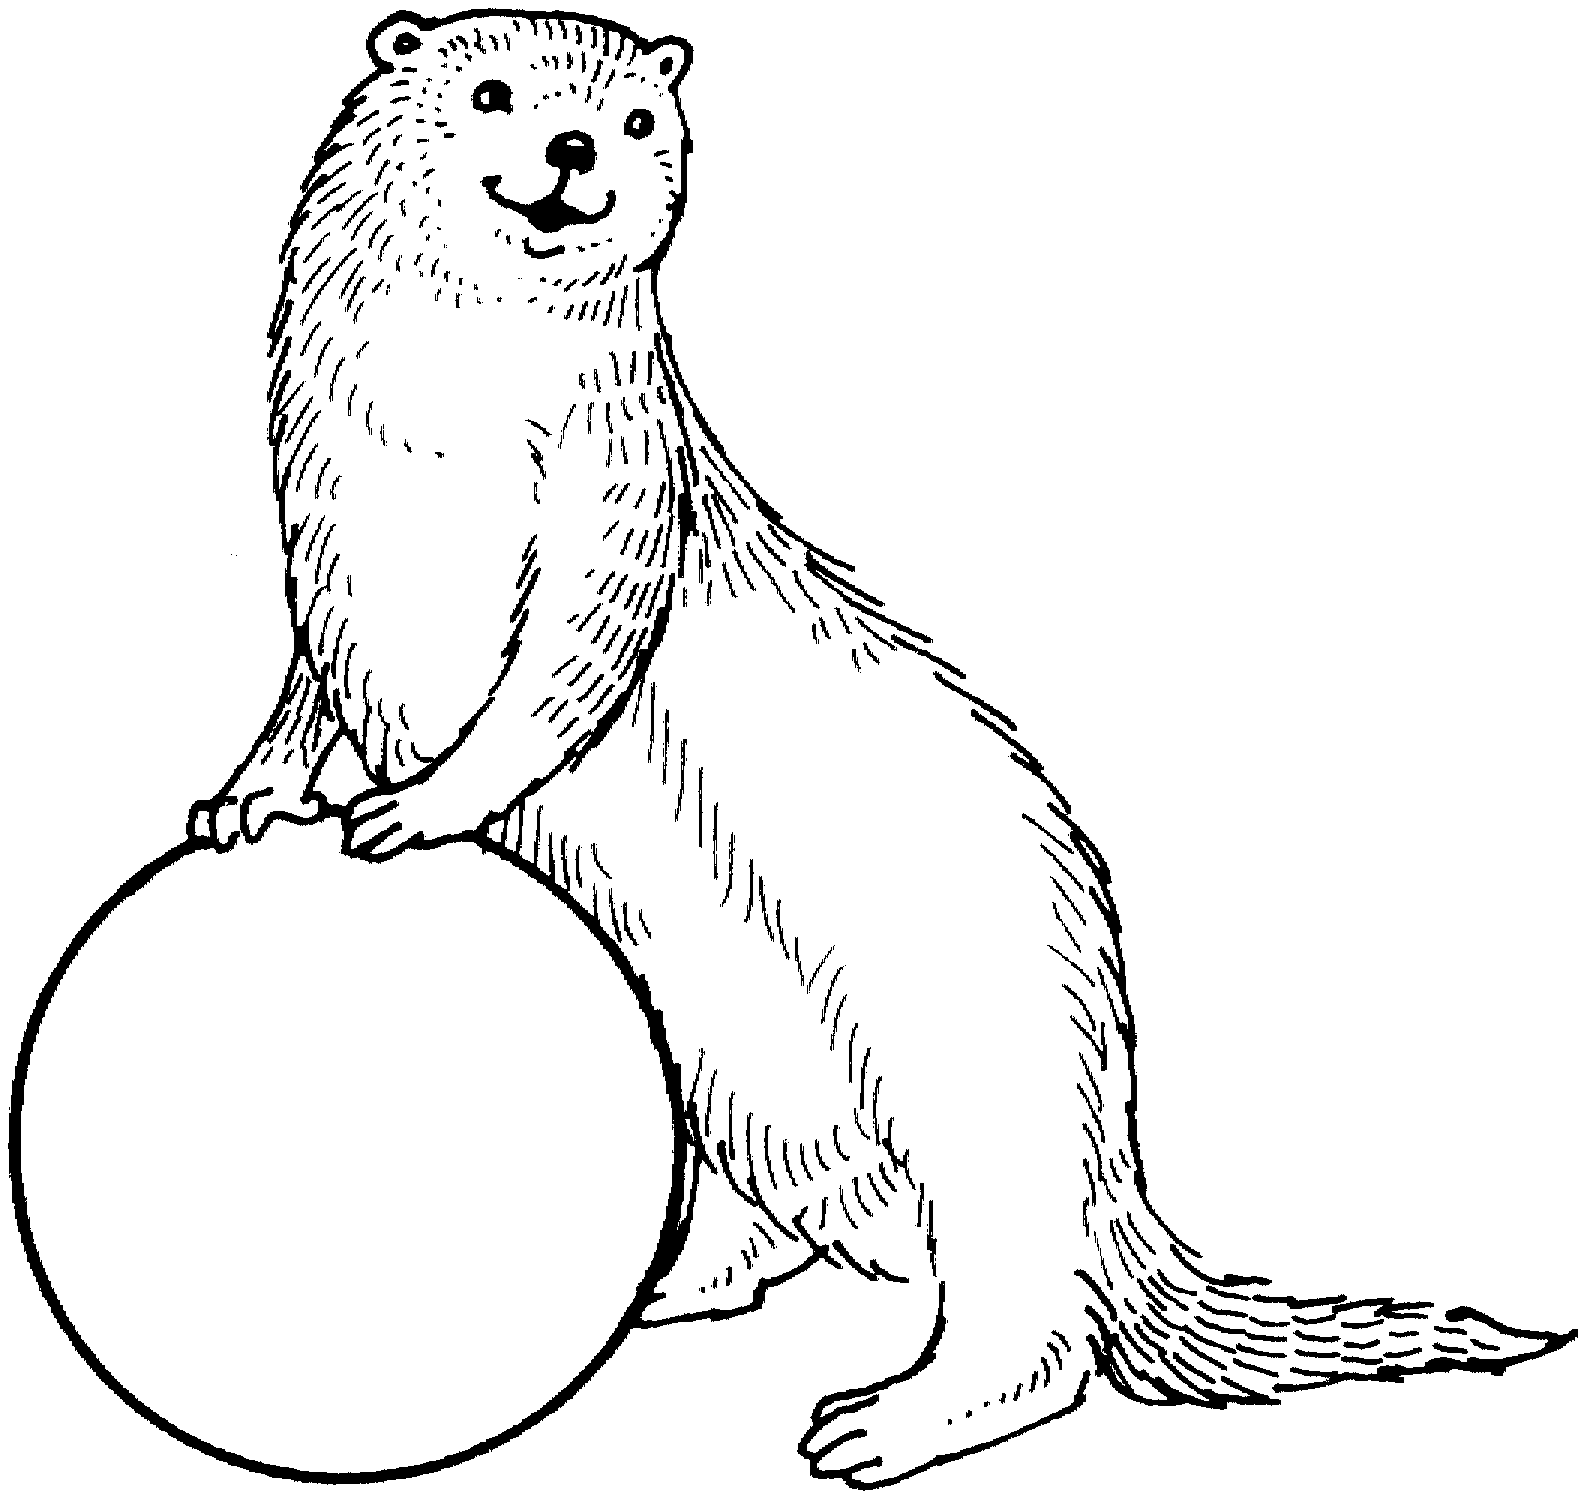 otter coloring pages sea otter awareness week 2012 jen richards otter pages coloring 